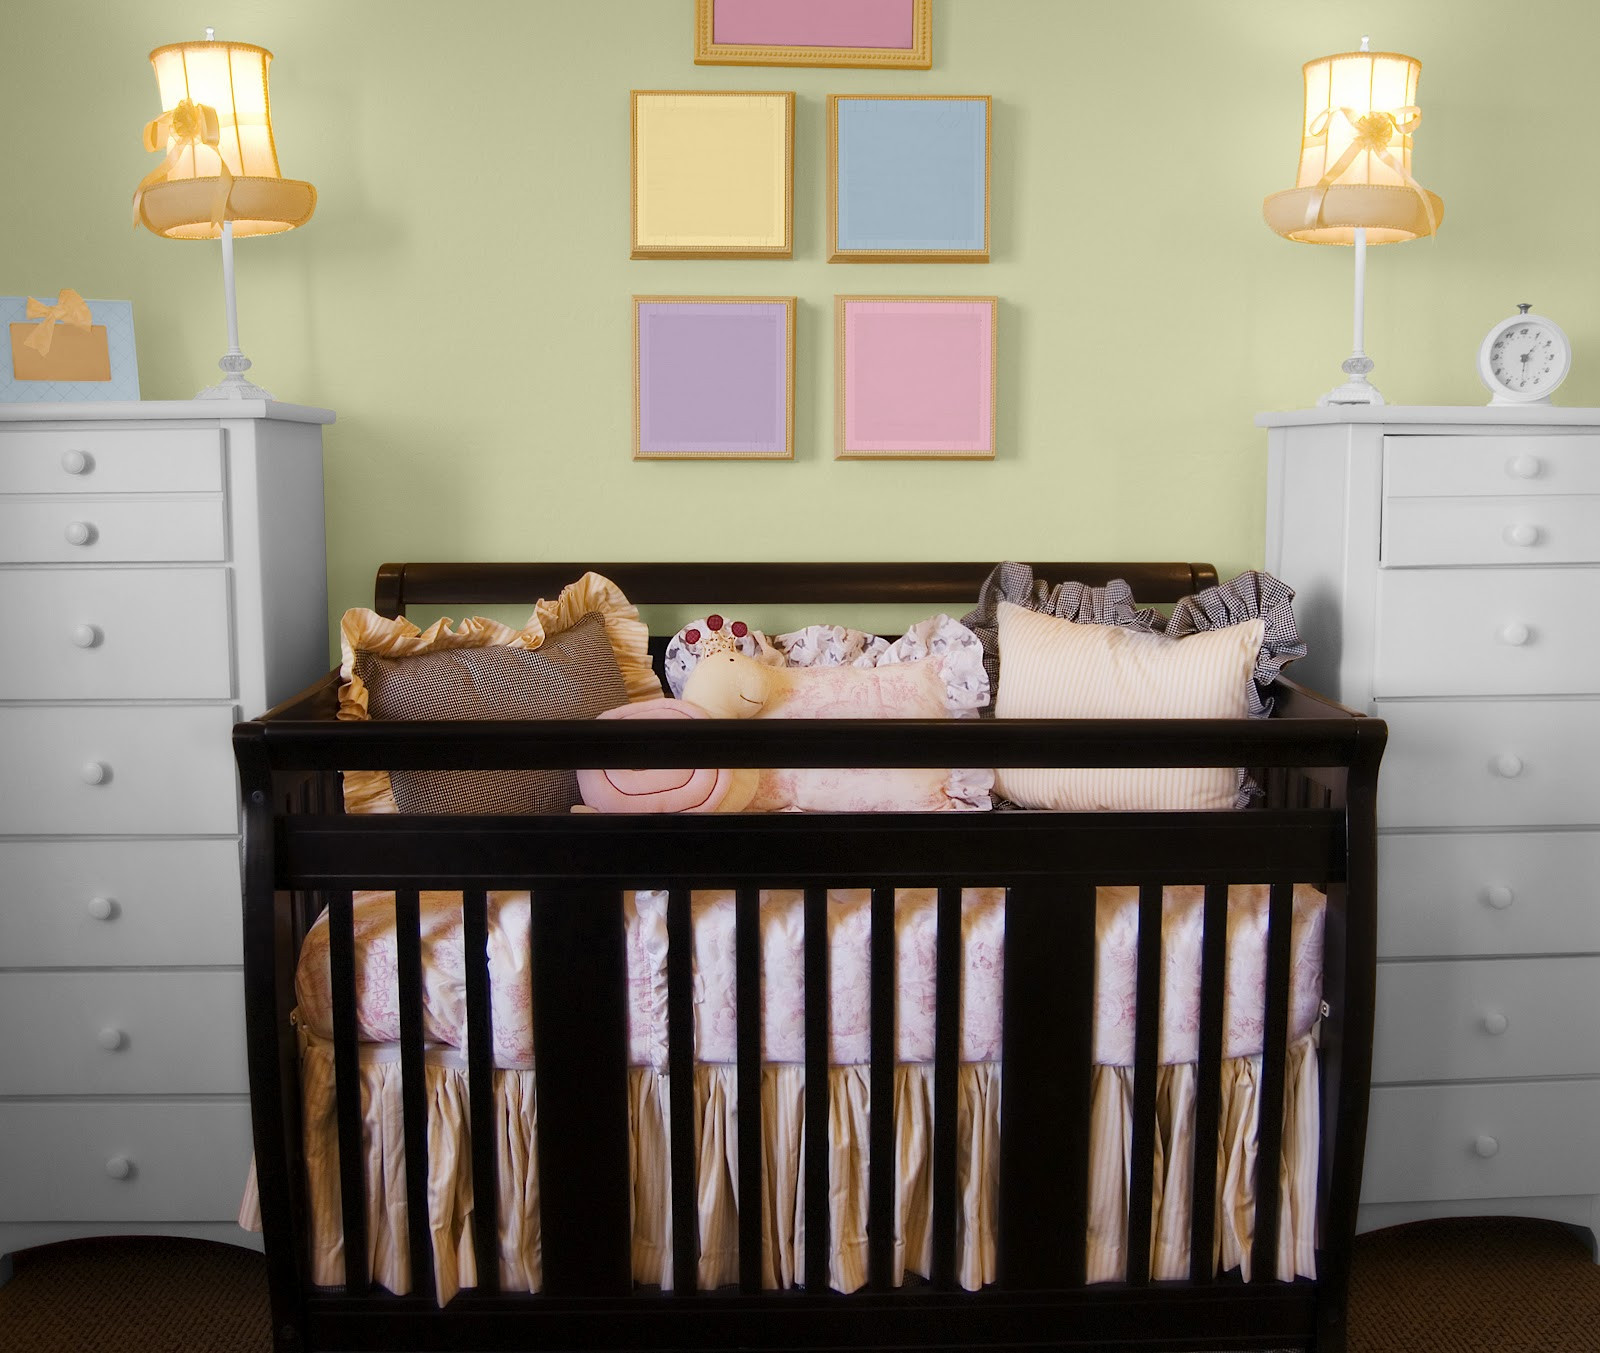 Baby Room Decorations Ideas
 Top 10 Baby Nursery Room Colors And Decorating Ideas